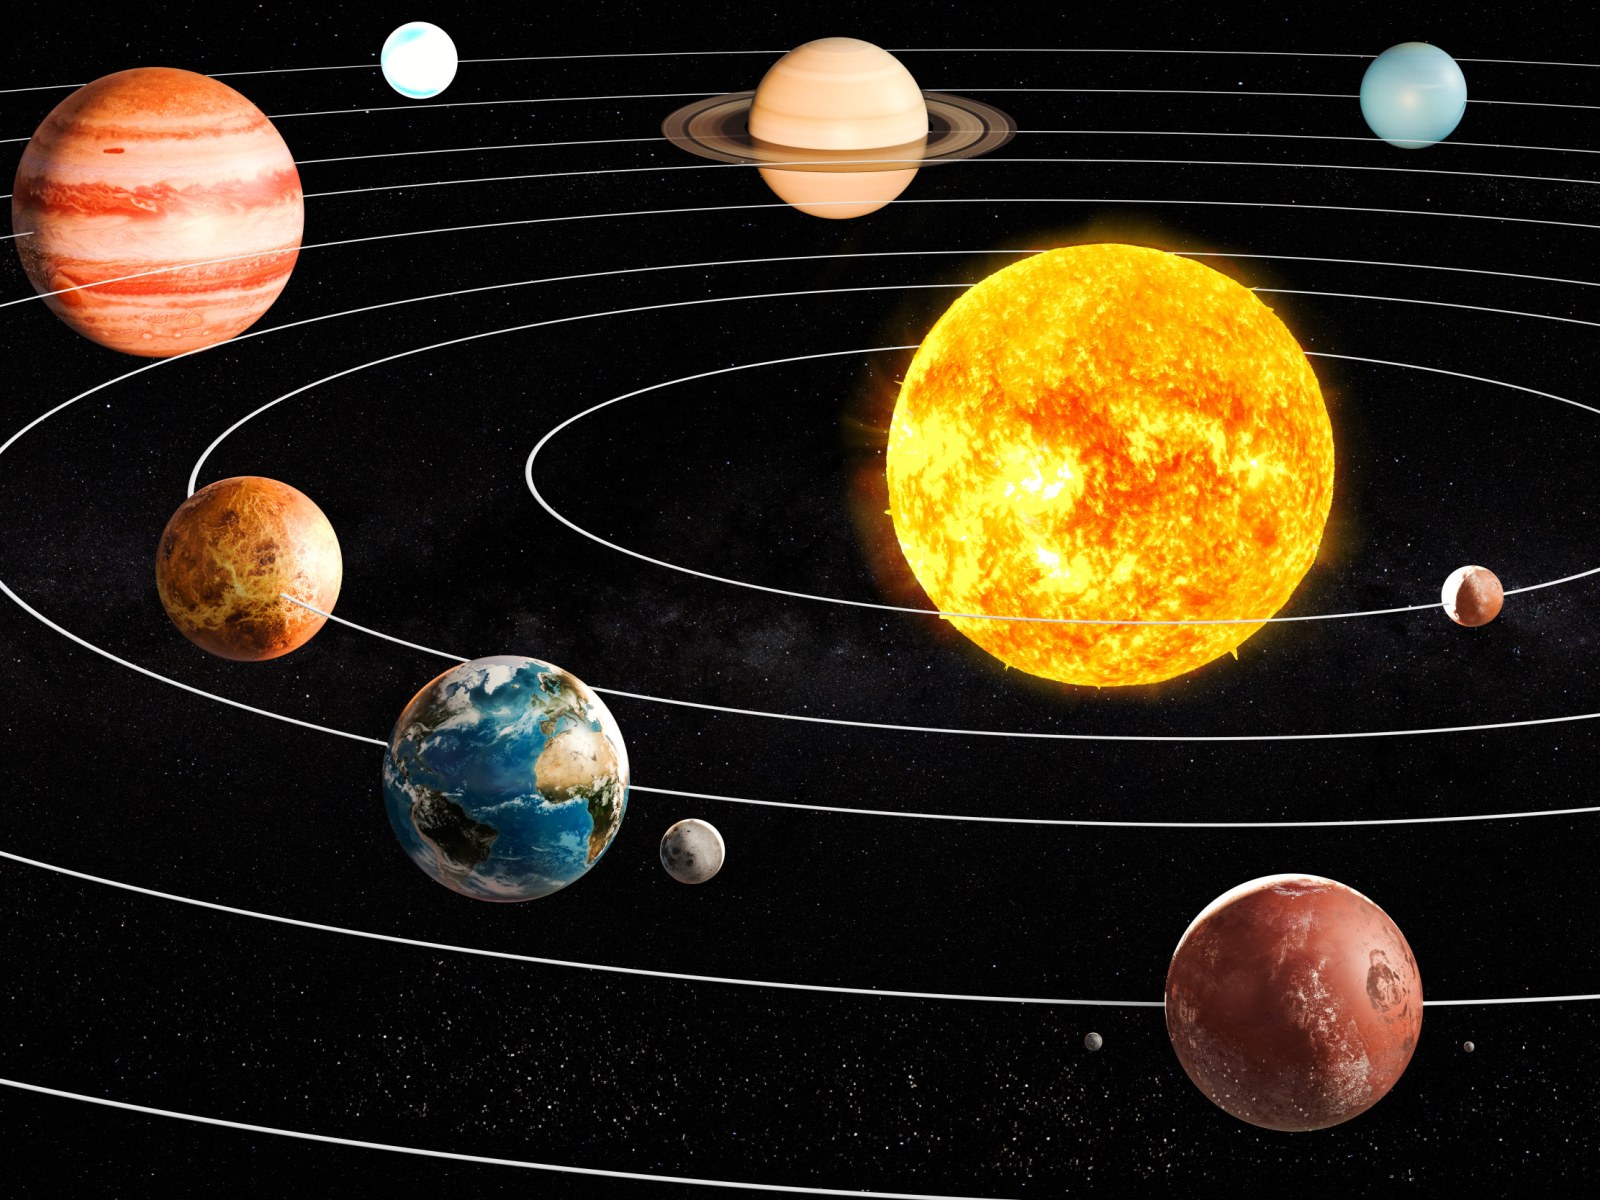 solar system planets in order